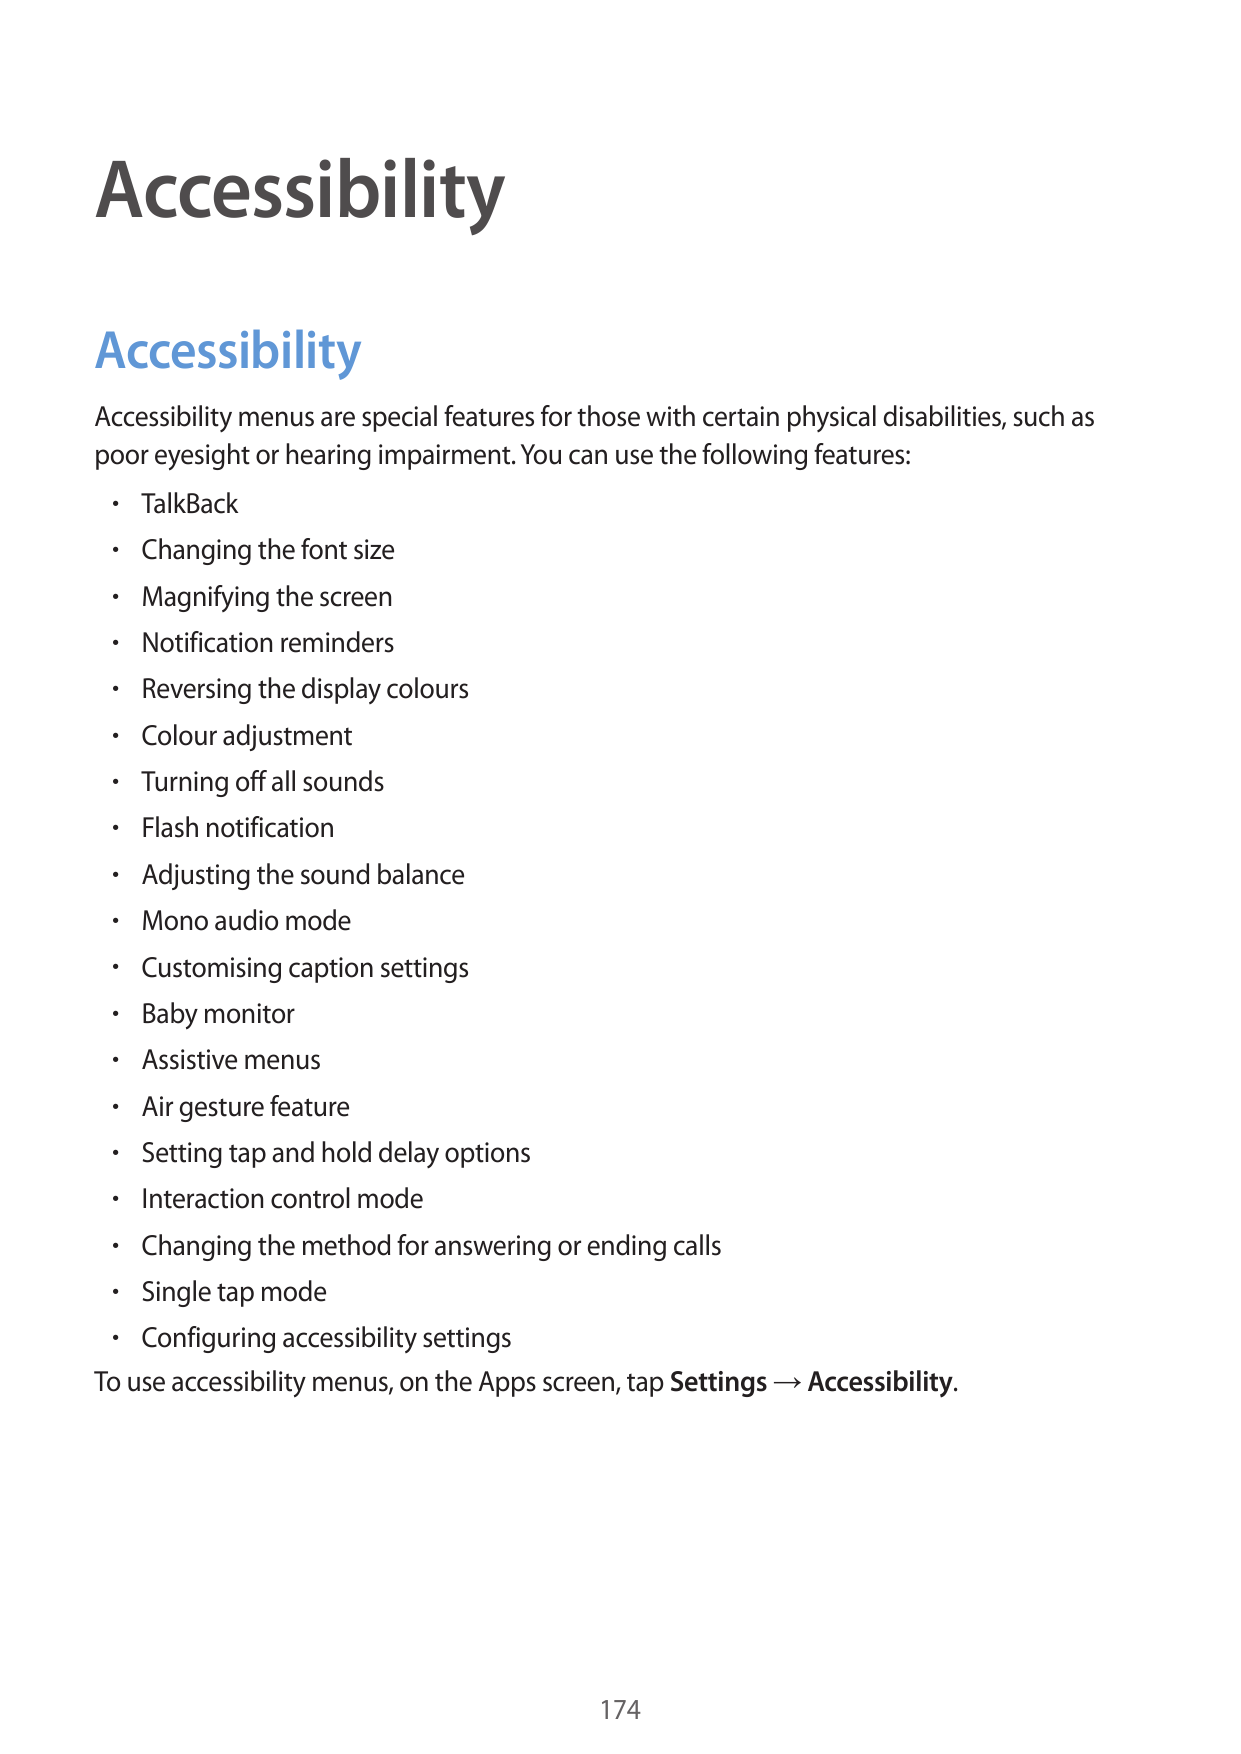 AccessibilityAccessibilityAccessibility menus are special features for those with certain physical disabilities, such aspoor eye